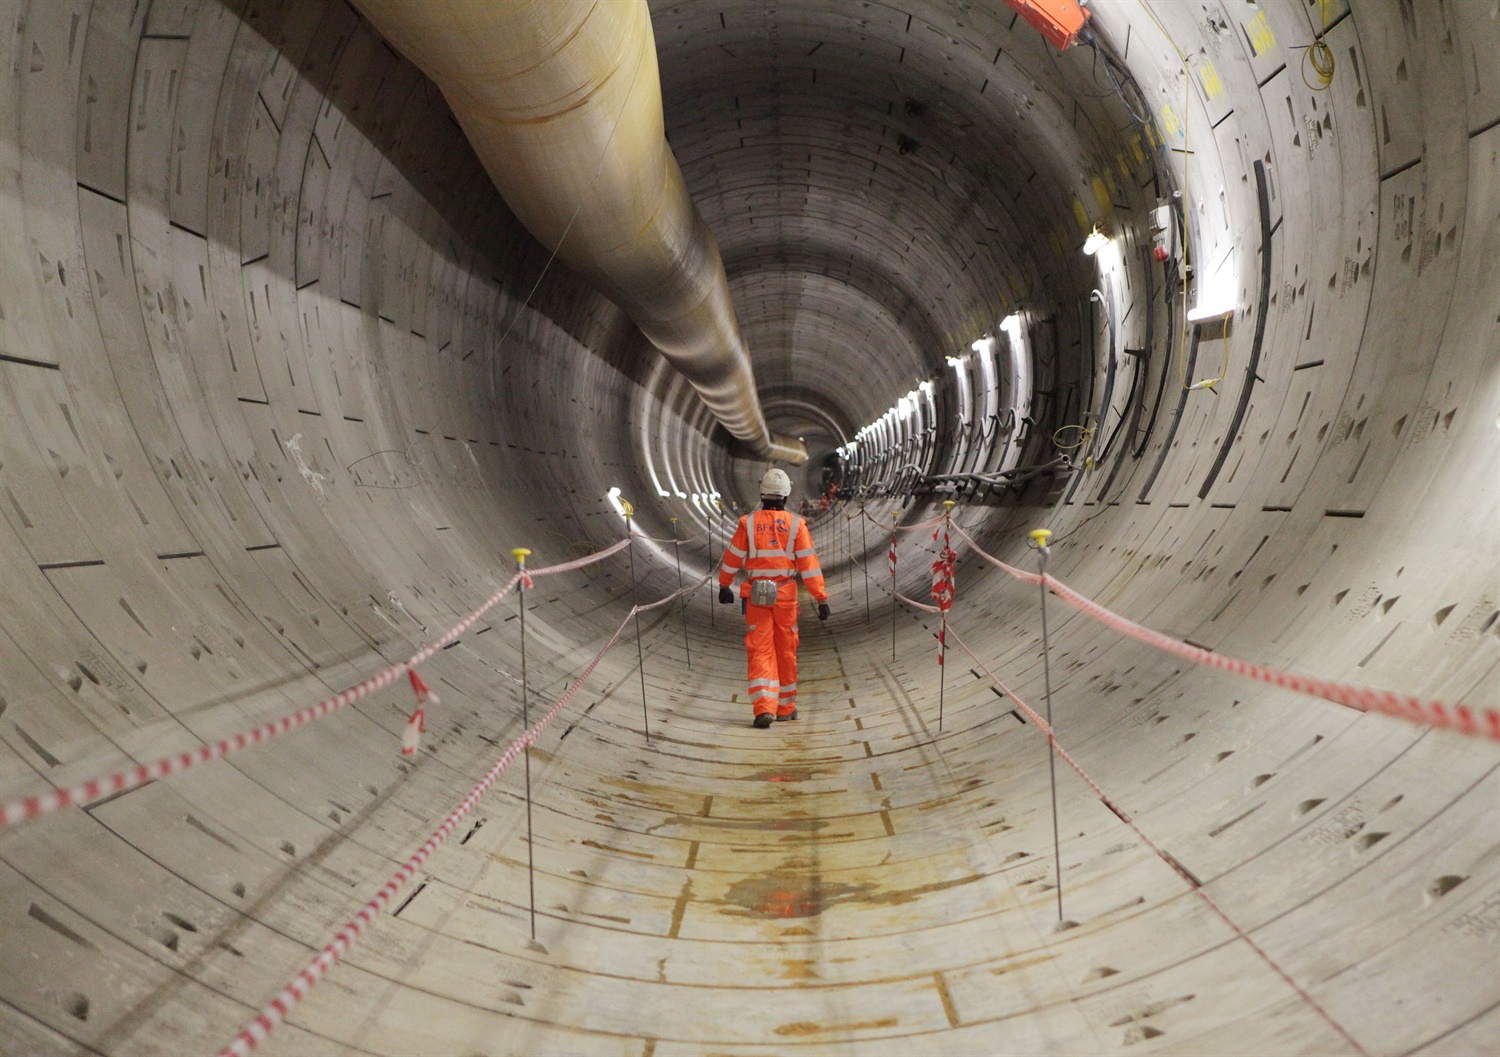 Crossrail documents reveal ‘lack of welfare’ for workers on site